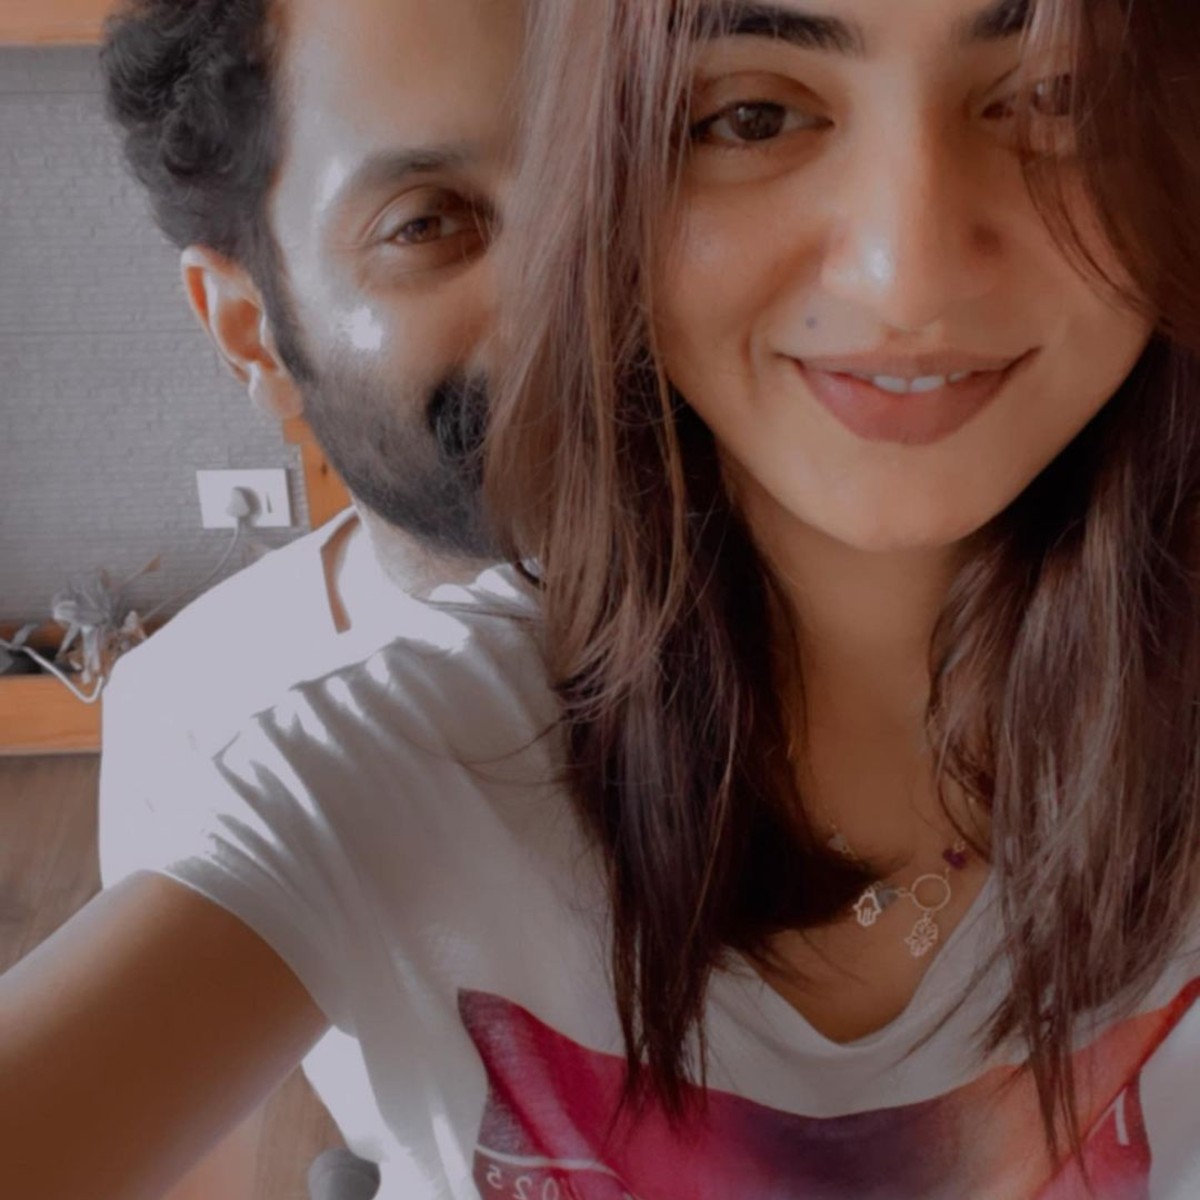 Nazriya Nazim and Fahadh Faasil are lovestruck in the latest selfies shared by the former; See PHOTOS